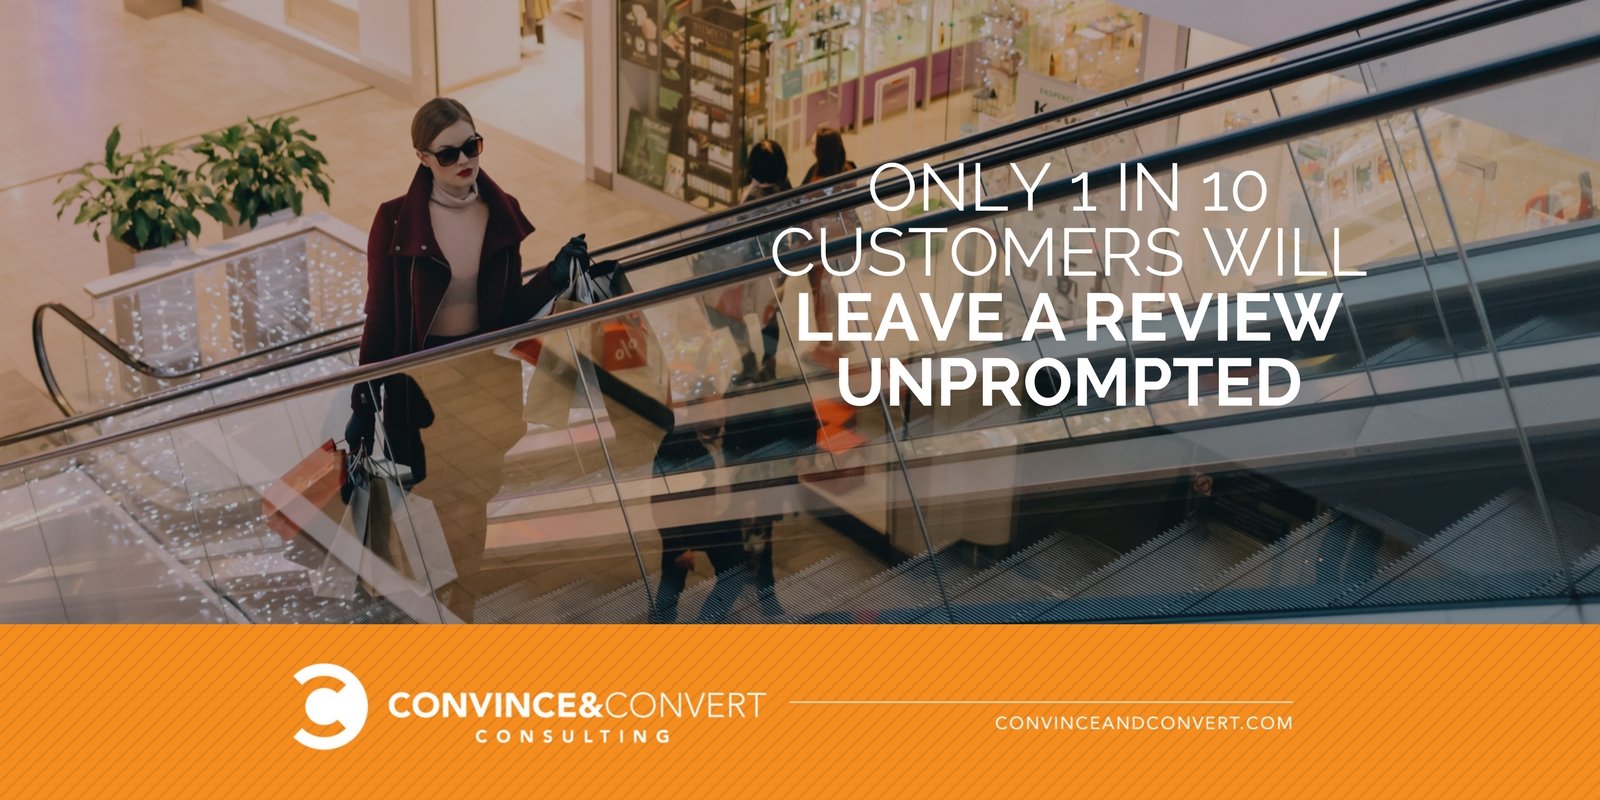 1 in 10 customers will leave a review unprompted